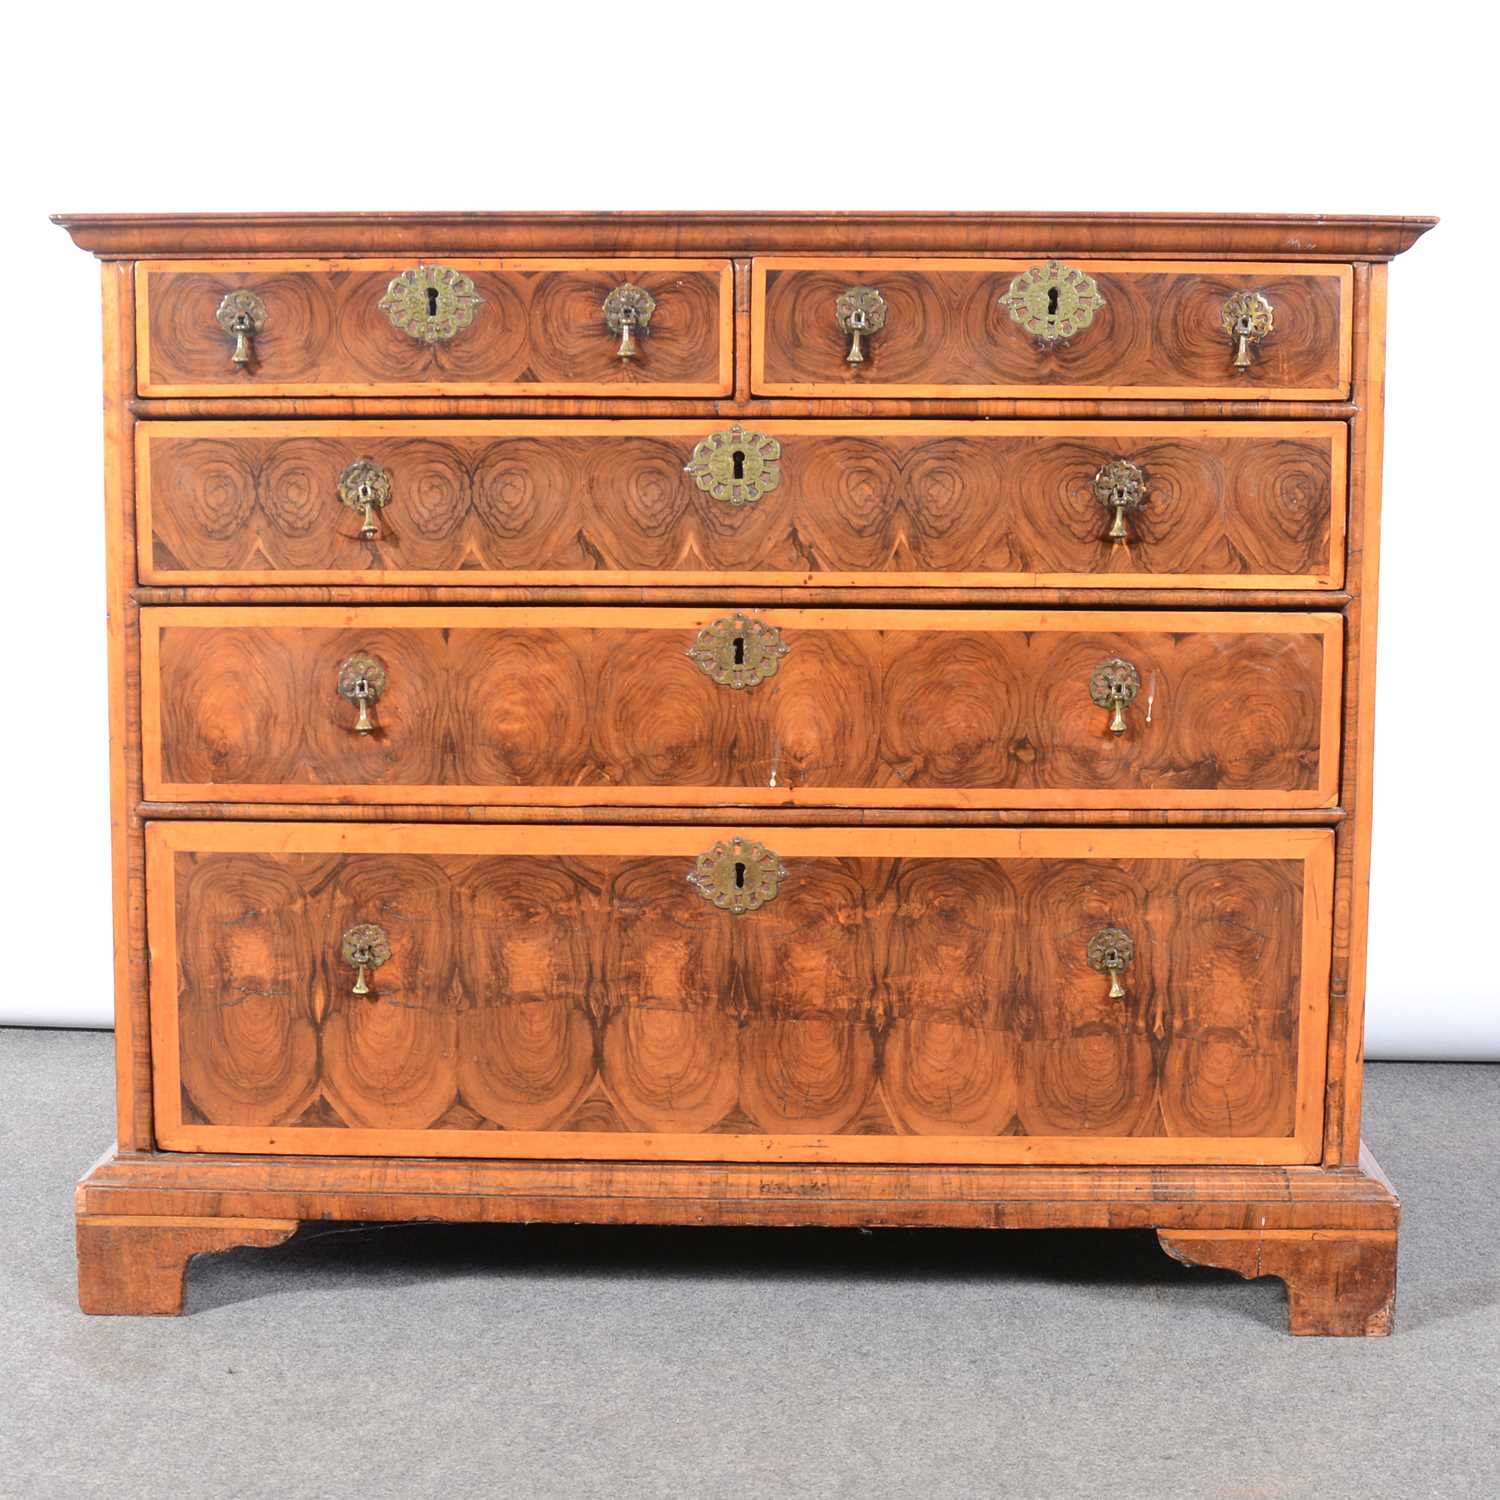 Lot 48 - A William and Mary oyster laburnum chest of drawers